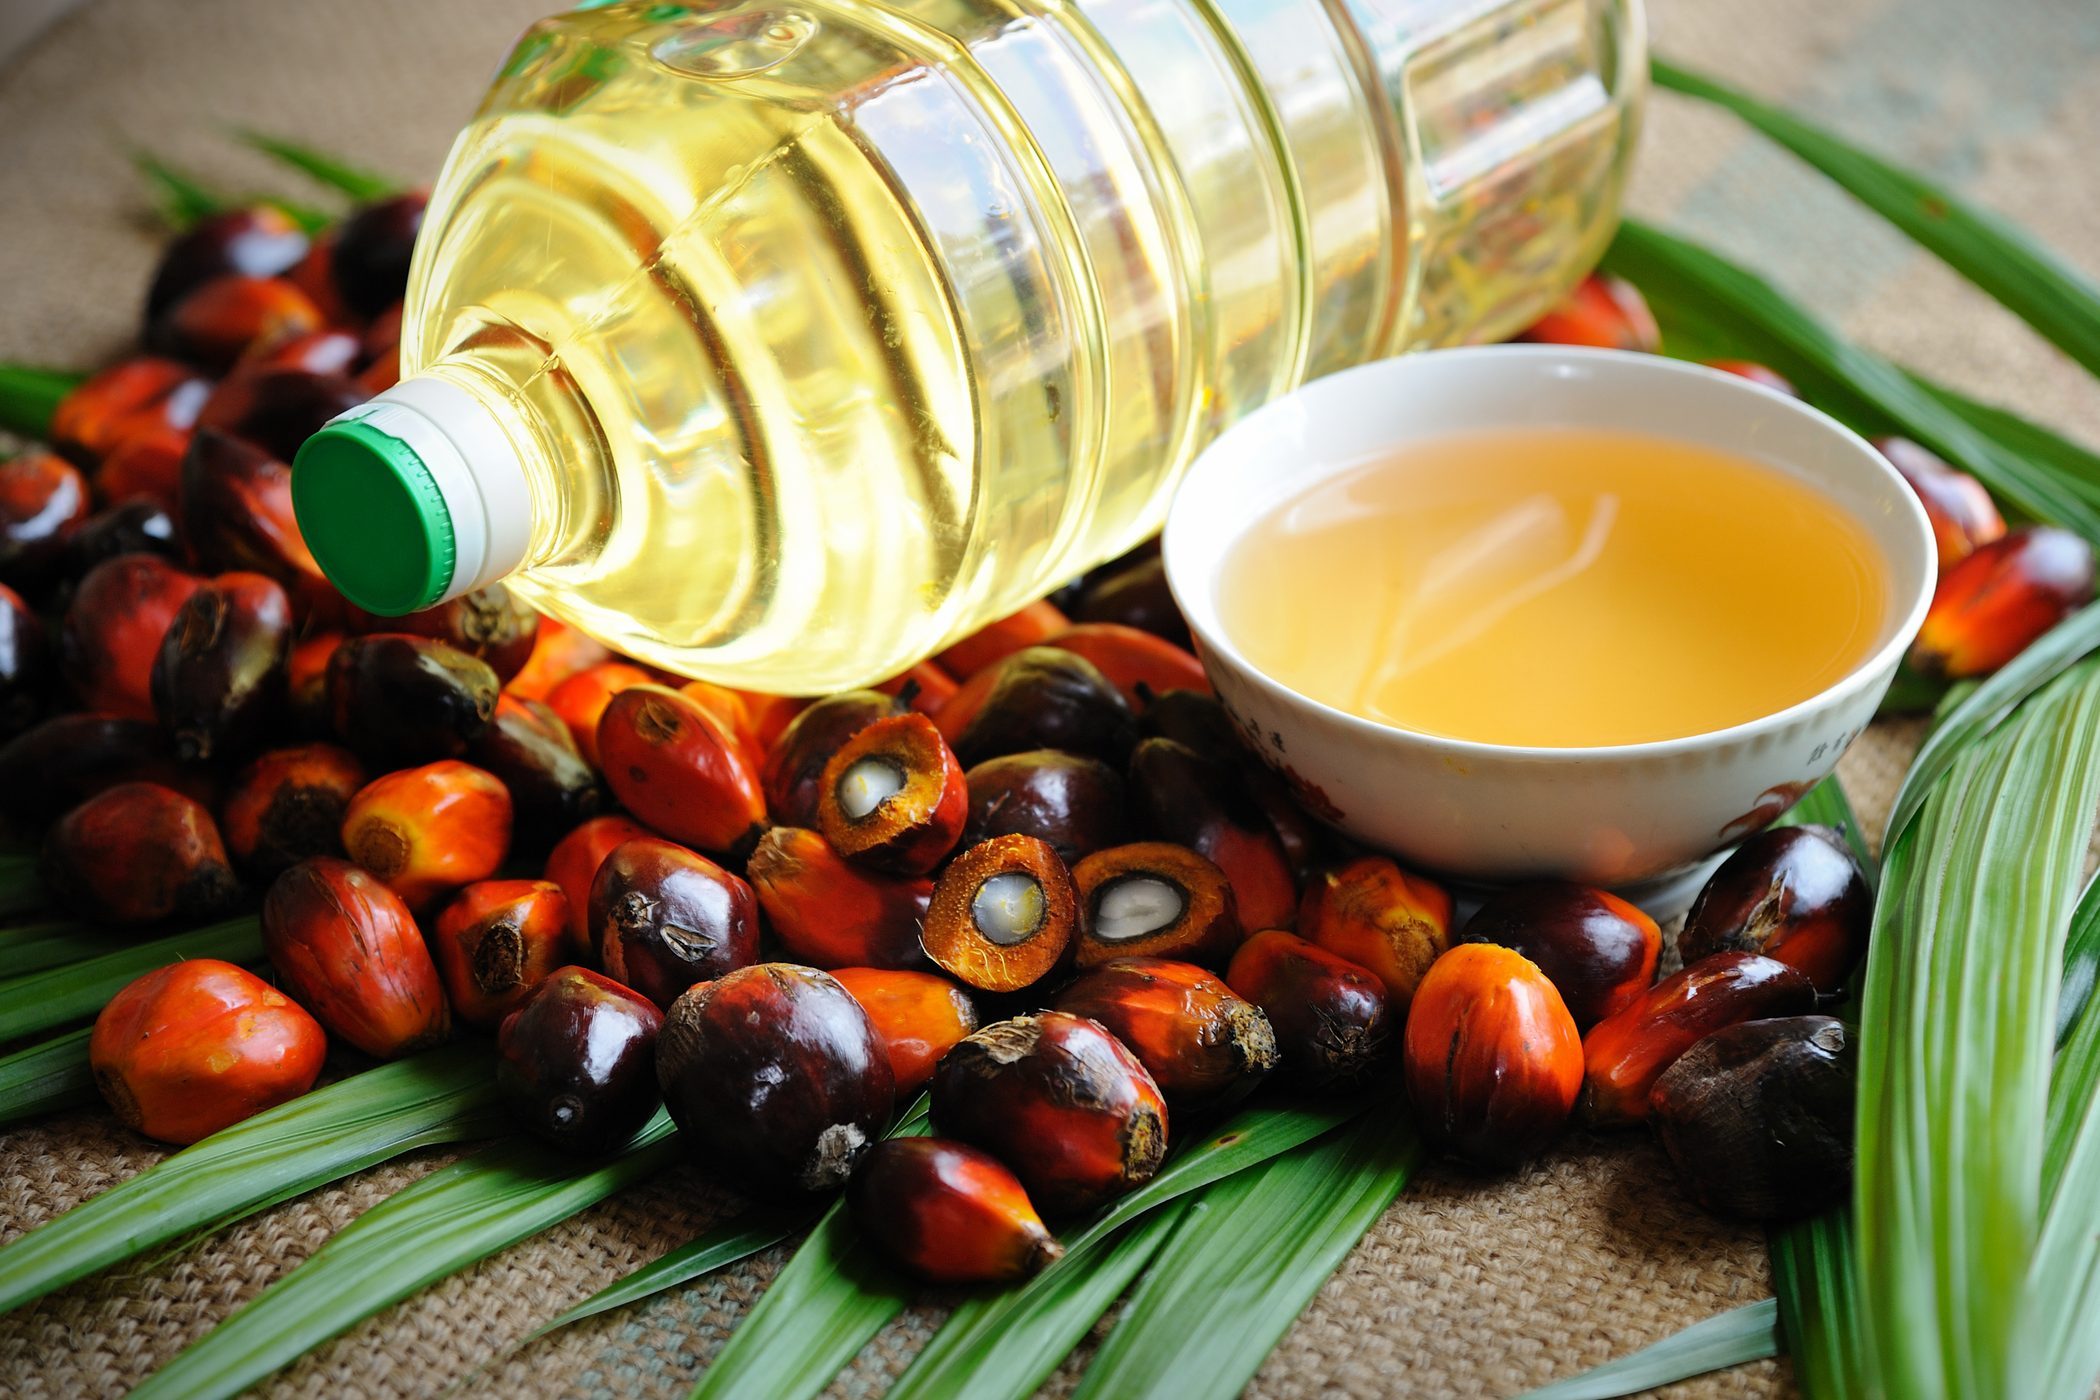 Is Palm Oil Bad for You? What You Need to Know